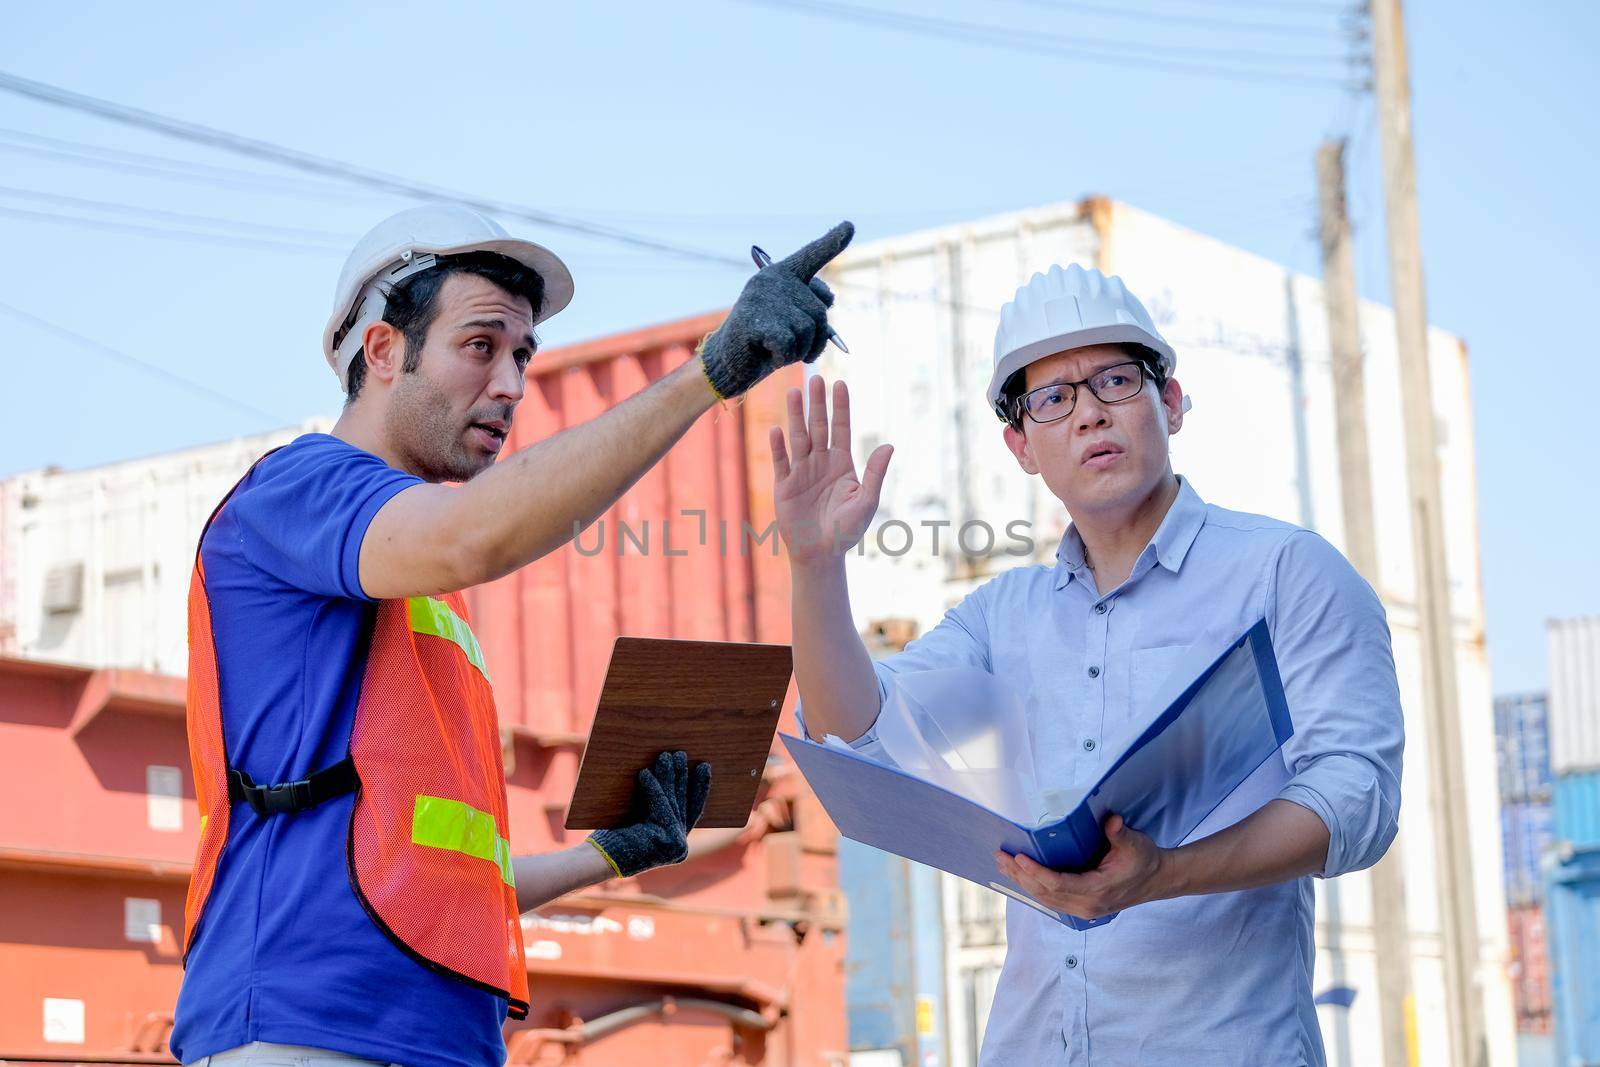 Technician and manager argue with the problem in cargo containers shipping area. by nrradmin